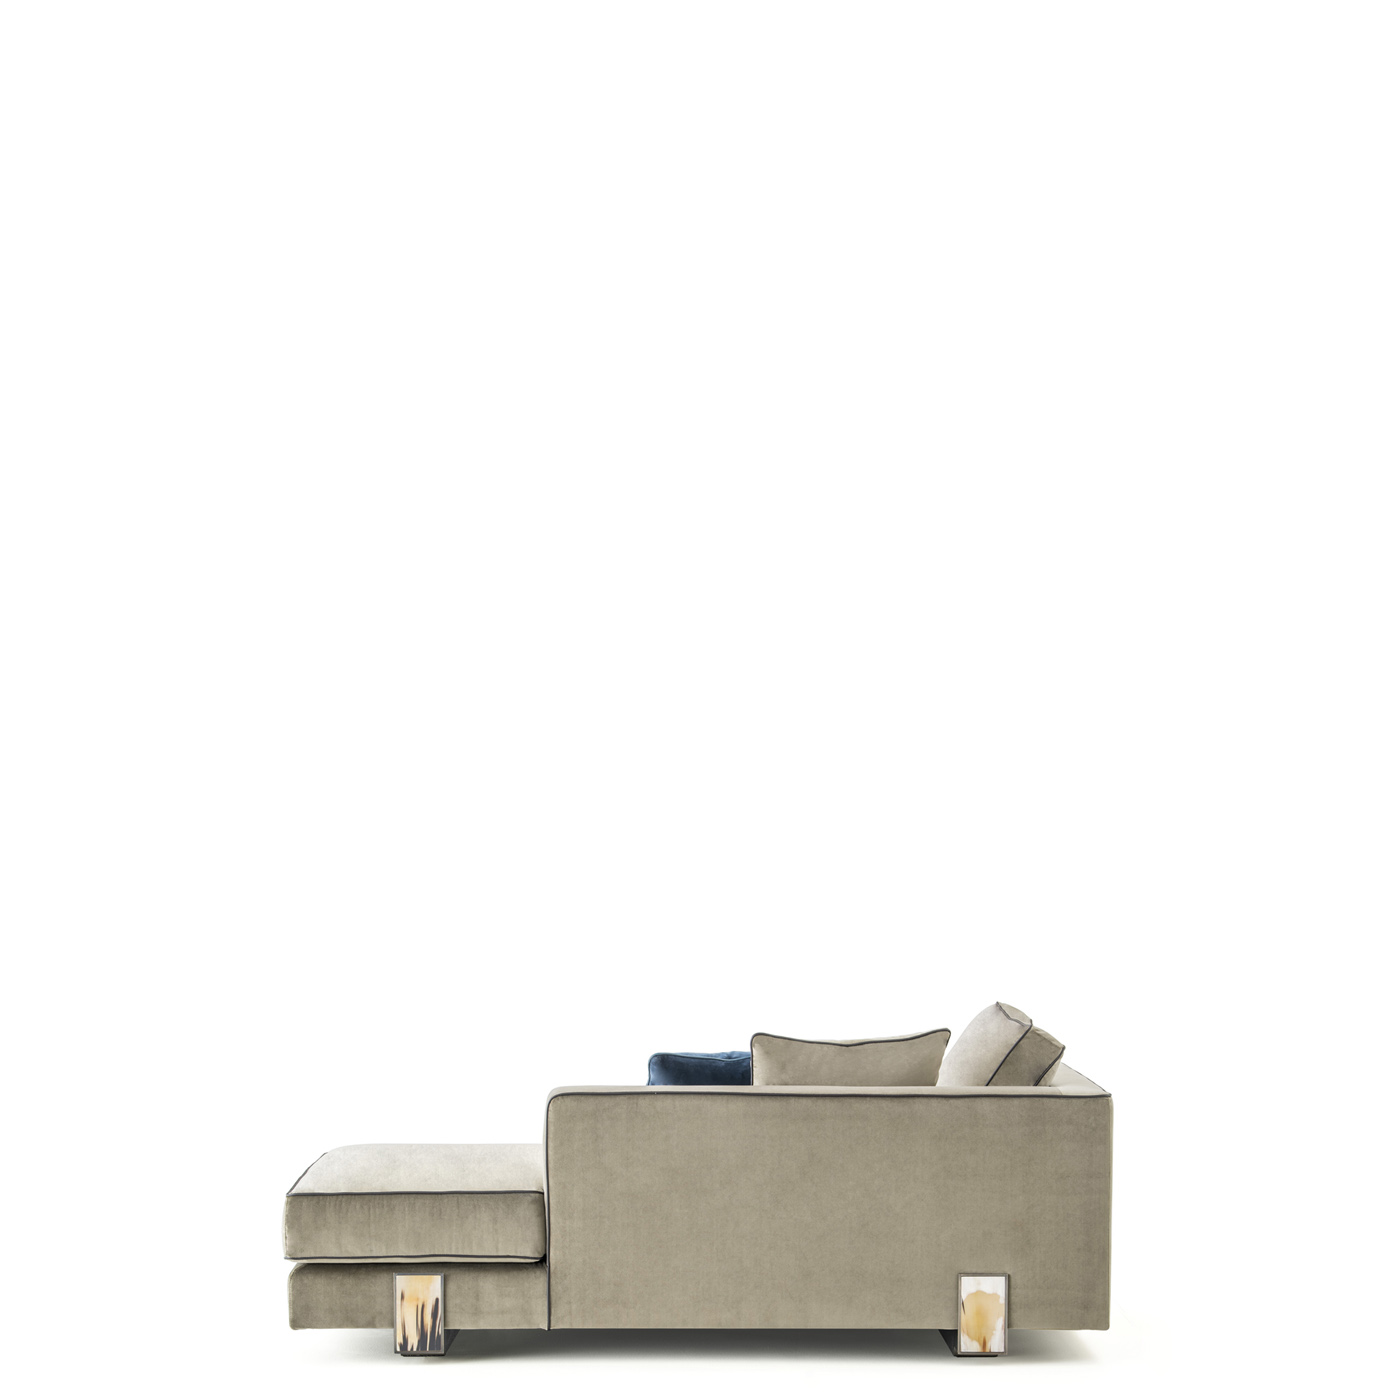 Sofas and seats - Adriano chaise longue in Lario velvet with horn details - back - Arcahorn